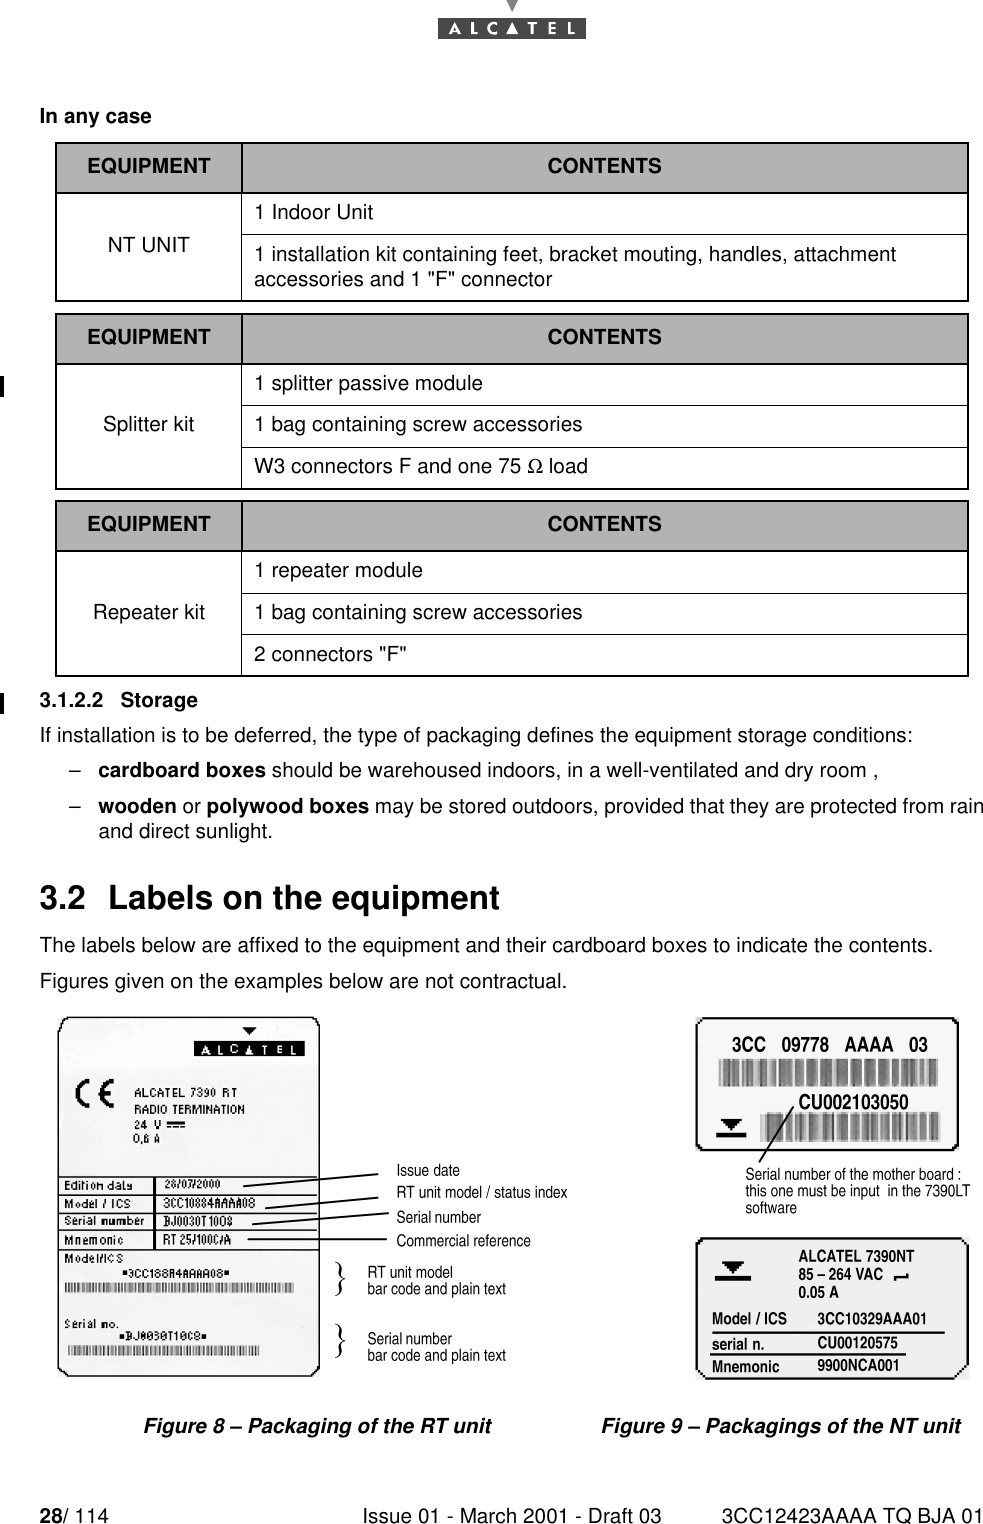 28/ 114 Issue 01 - March 2001 - Draft 03 3CC12423AAAA TQ BJA 0152In any case3.1.2.2   StorageIf installation is to be deferred, the type of packaging defines the equipment storage conditions:–cardboard boxes should be warehoused indoors, in a well-ventilated and dry room ,–wooden or polywood boxes may be stored outdoors, provided that they are protected from rainand direct sunlight.3.2  Labels on the equipmentThe labels below are affixed to the equipment and their cardboard boxes to indicate the contents.Figures given on the examples below are not contractual.EQUIPMENT CONTENTSNT UNIT1 Indoor Unit1 installation kit containing feet, bracket mouting, handles, attachment accessories and 1 &quot;F&quot; connectorEQUIPMENT CONTENTSSplitter kit1 splitter passive module1 bag containing screw accessoriesW3 connectors F and one 75 Ω loadEQUIPMENT CONTENTSRepeater kit1 repeater module1 bag containing screw accessories2 connectors &quot;F&quot;Figure 8 – Packaging of the RT unit Figure 9 – Packagings of the NT unit